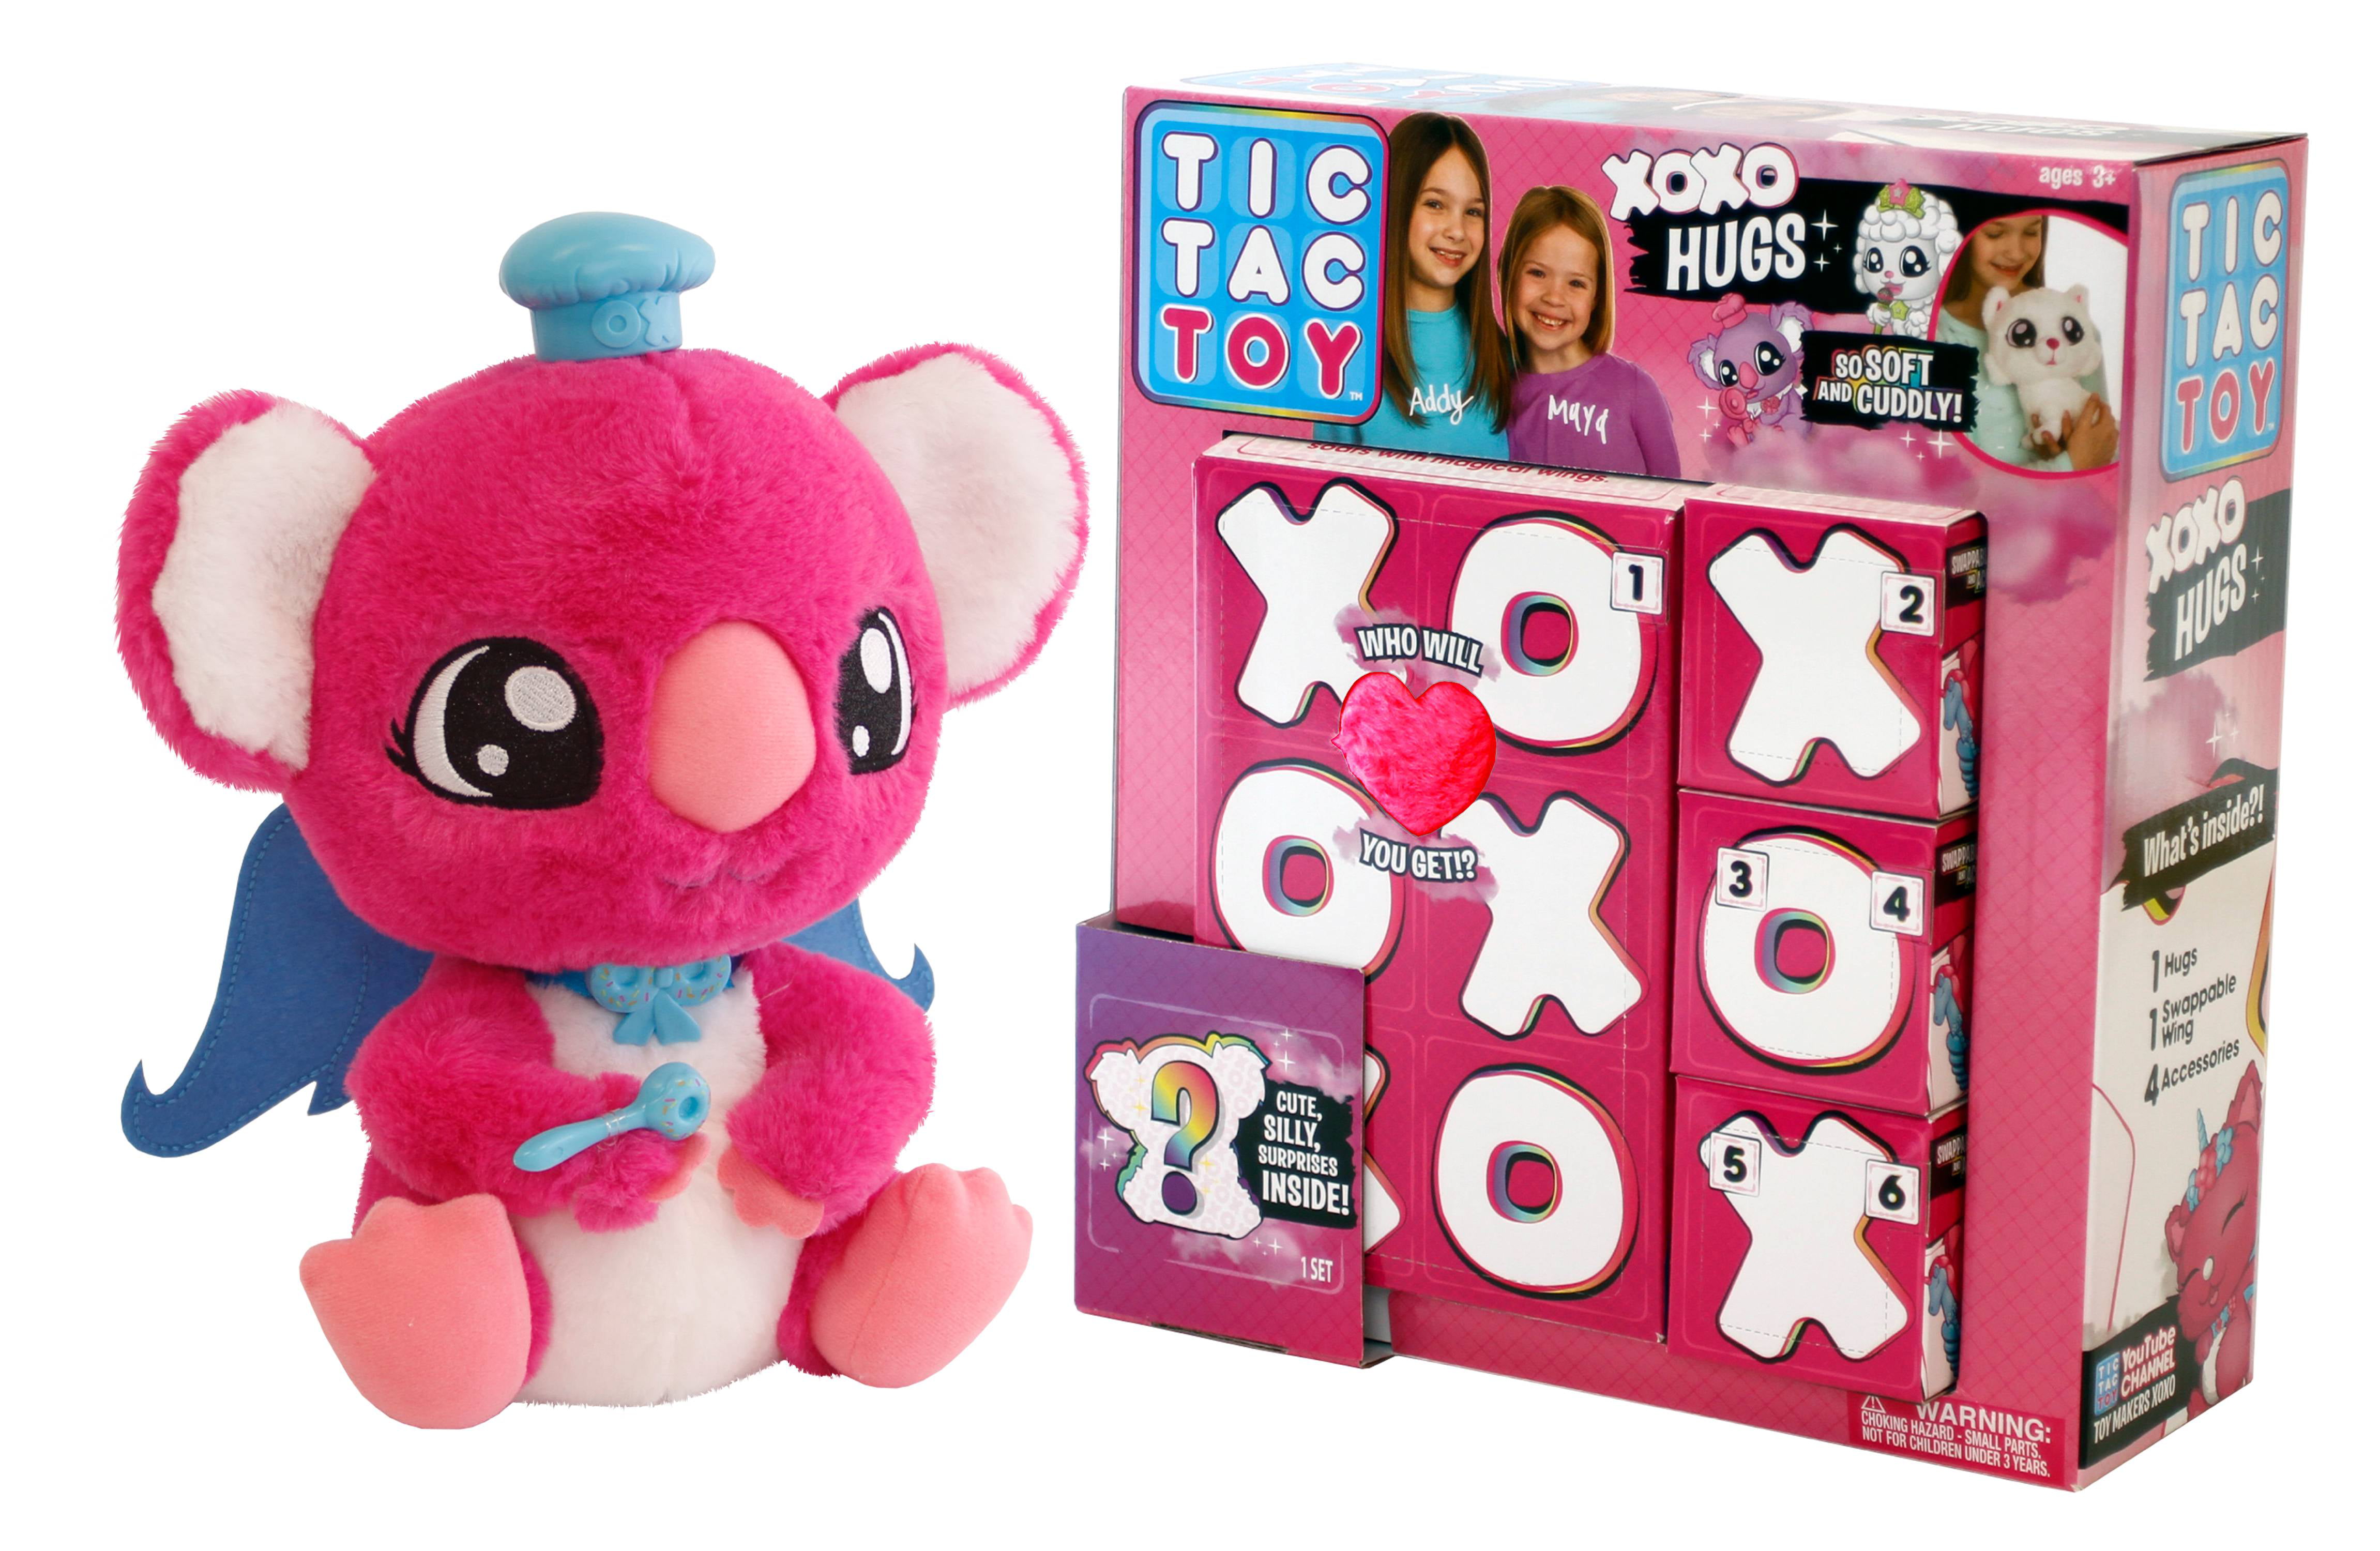 Tic Tac Toy Officially Launches XOXO Friends, XOXO Hugs Toy Collection -  The Toy Book